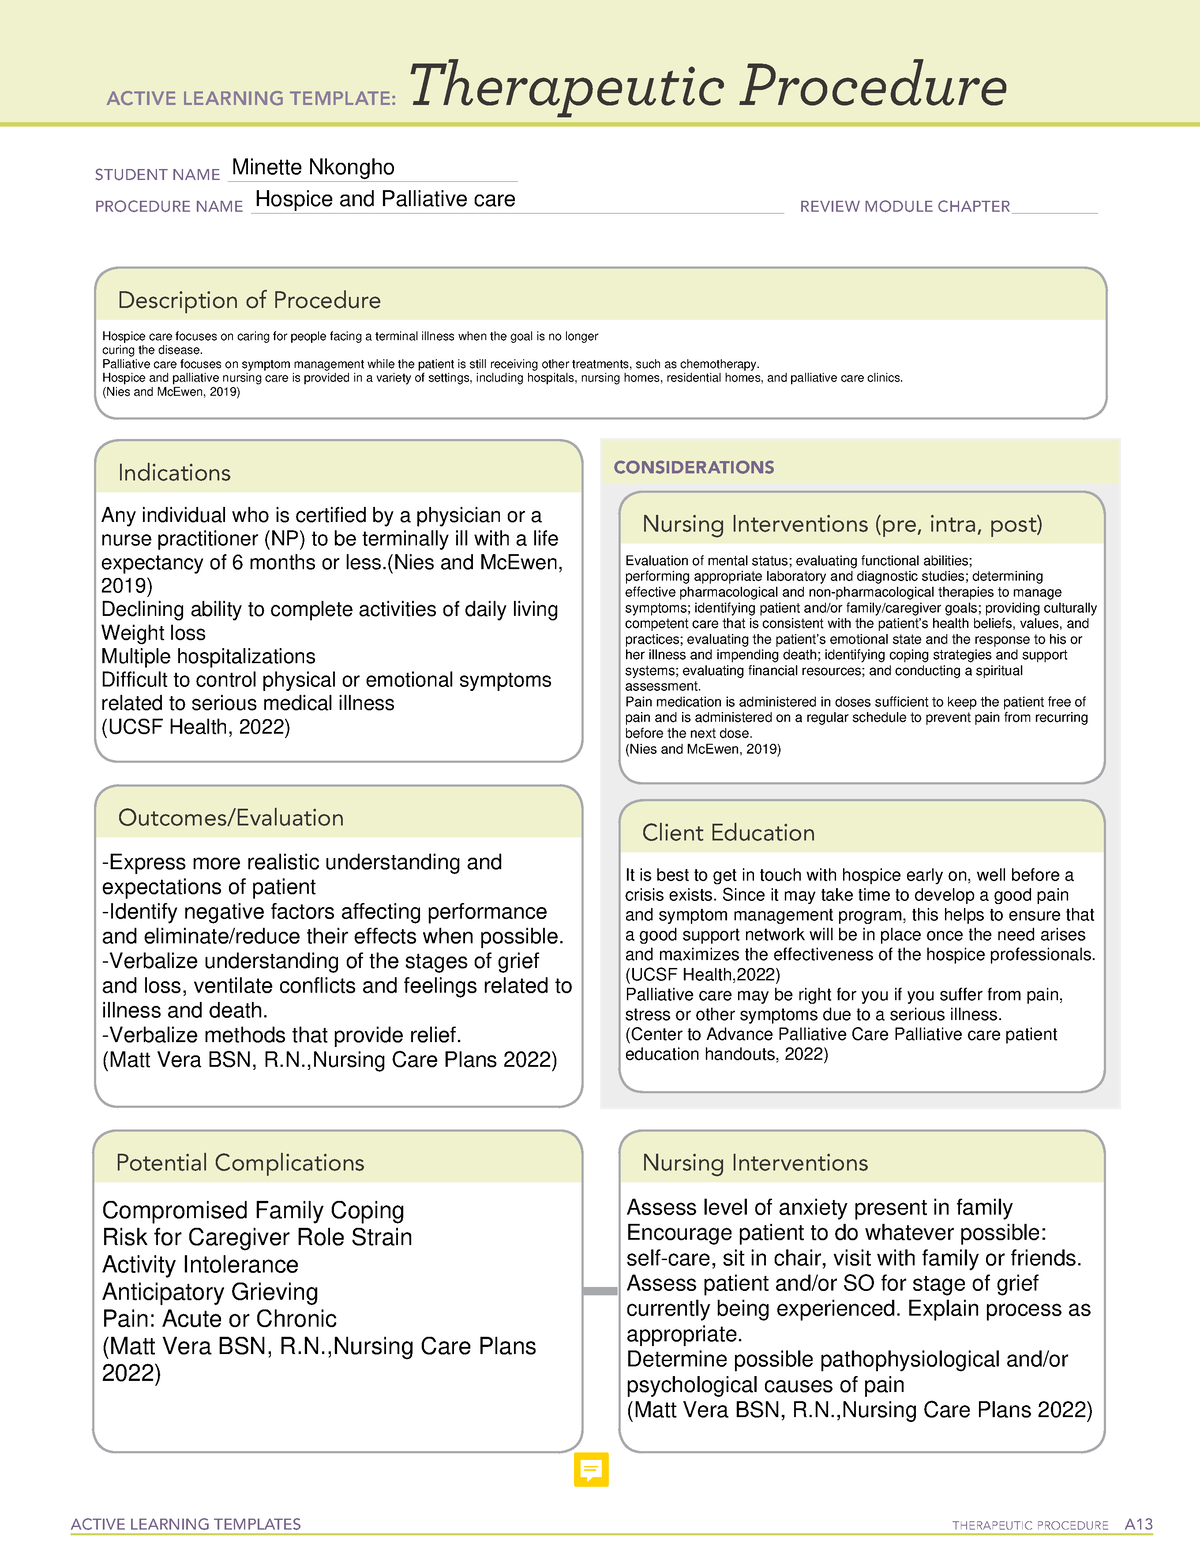 WK5 ALT Therapeutic Procedure - ACTIVE LEARNING TEMPLATES THERAPEUTIC ...